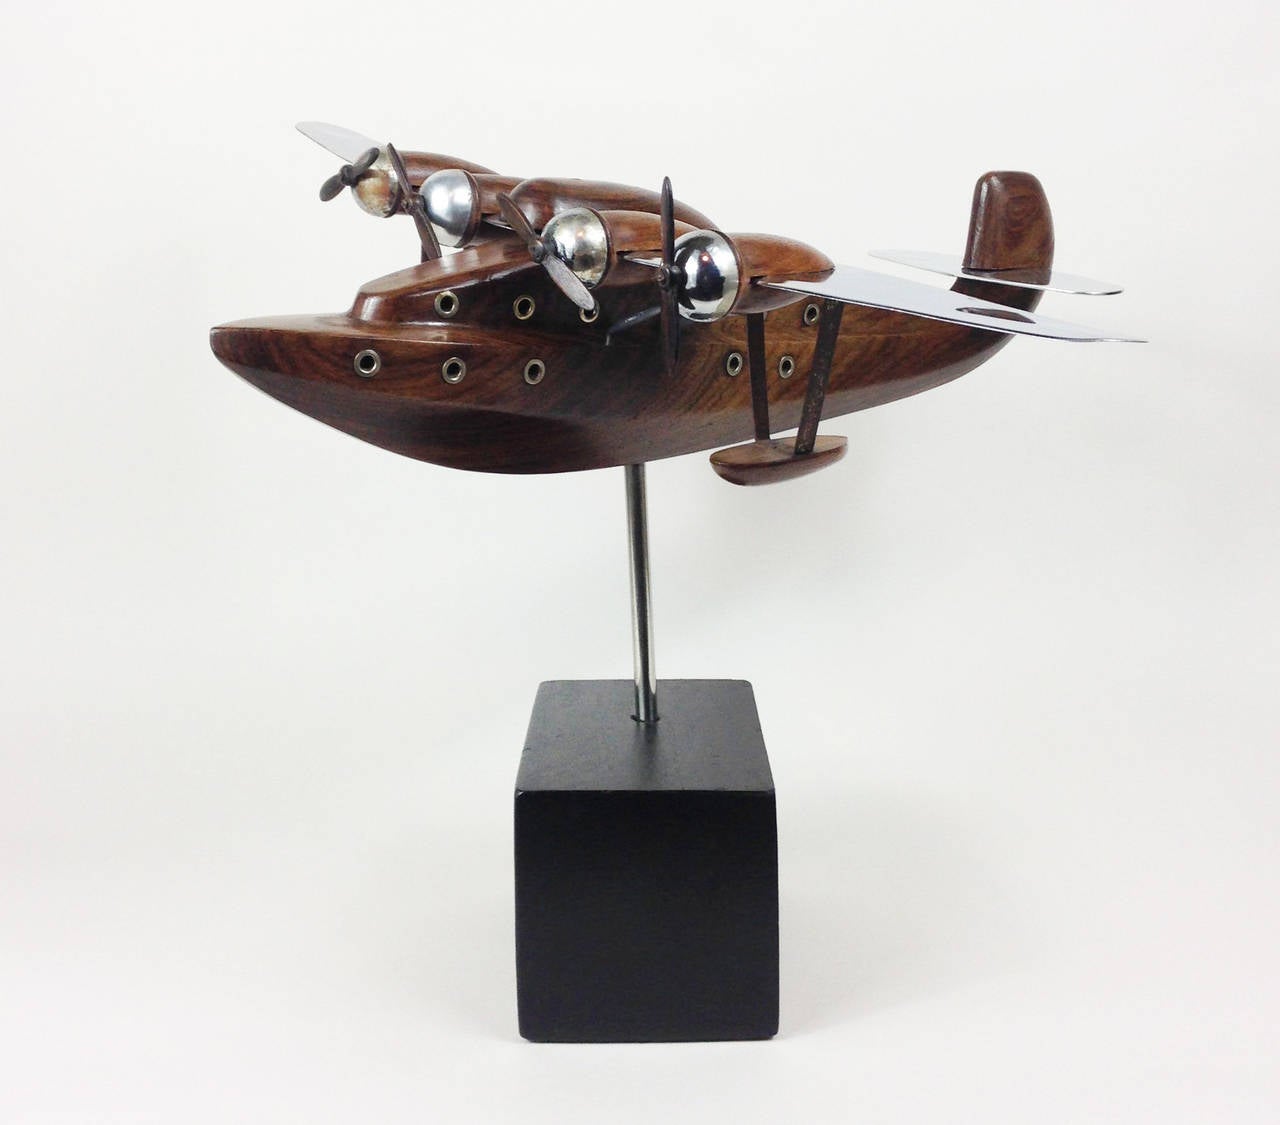 Art Deco Rosewood and Chrome Flying Boat Model, circa 1930